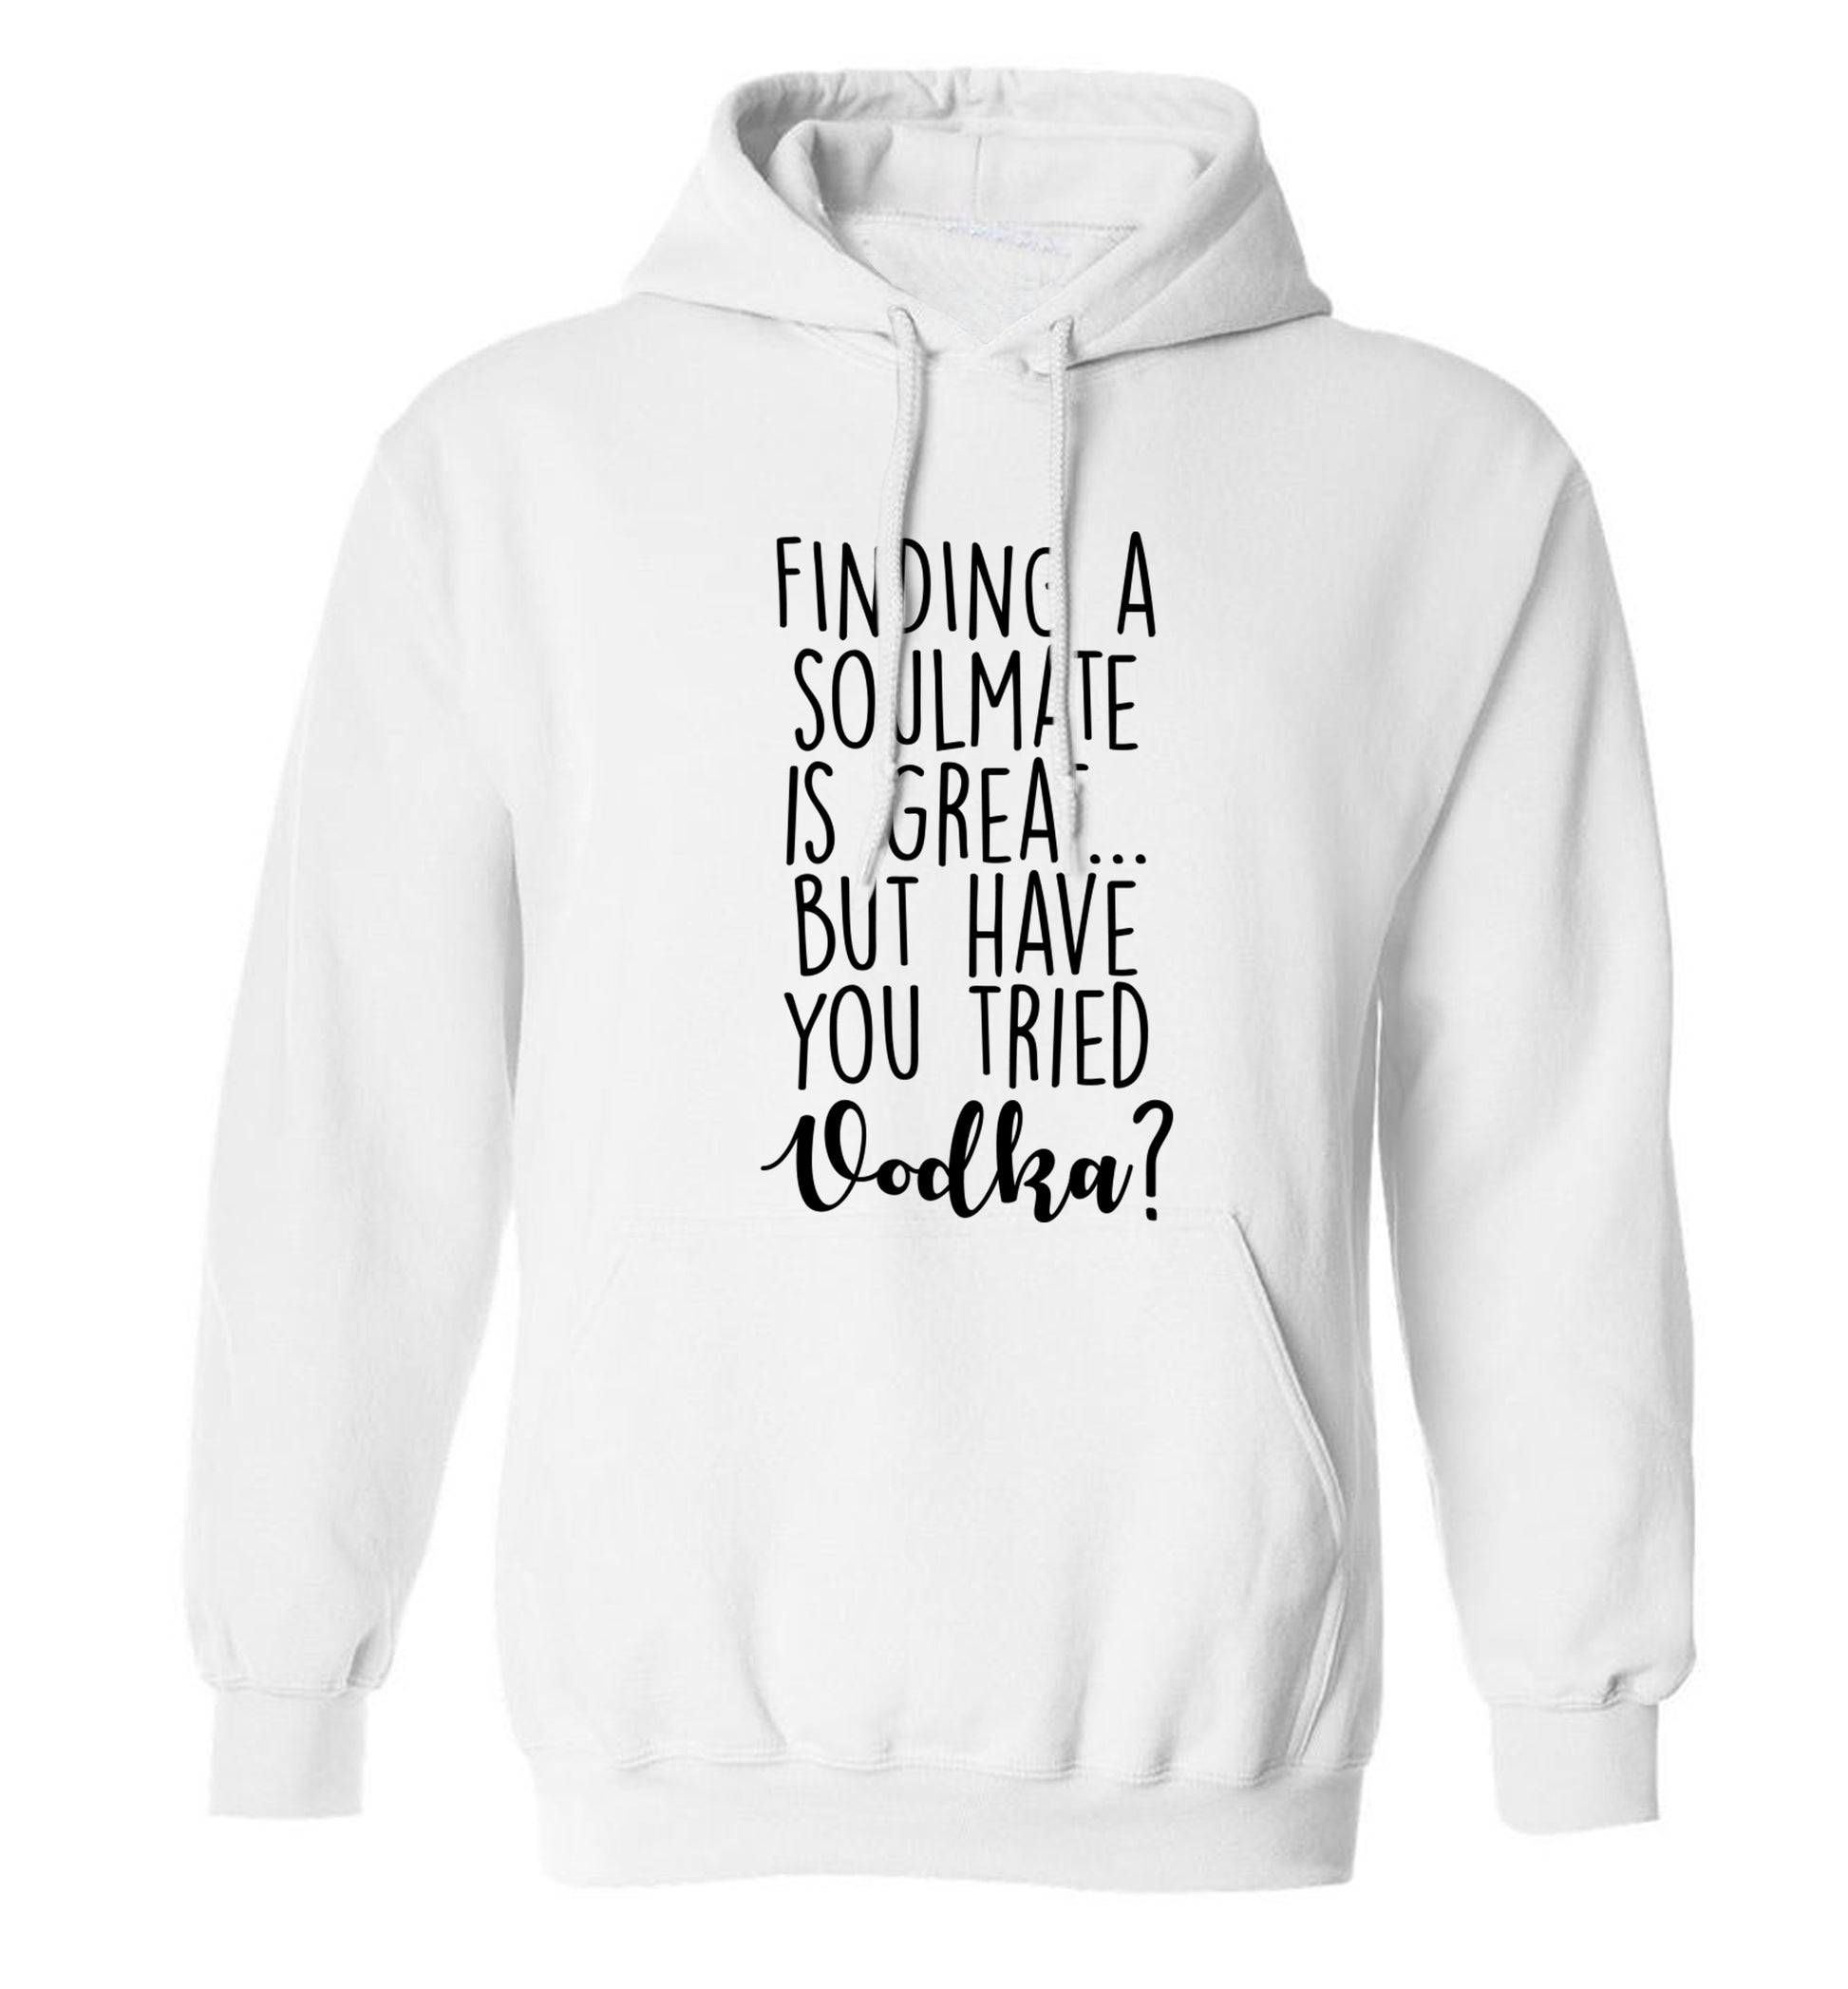 Finding a soulmate is great but have you tried vodka? adults unisex white hoodie 2XL